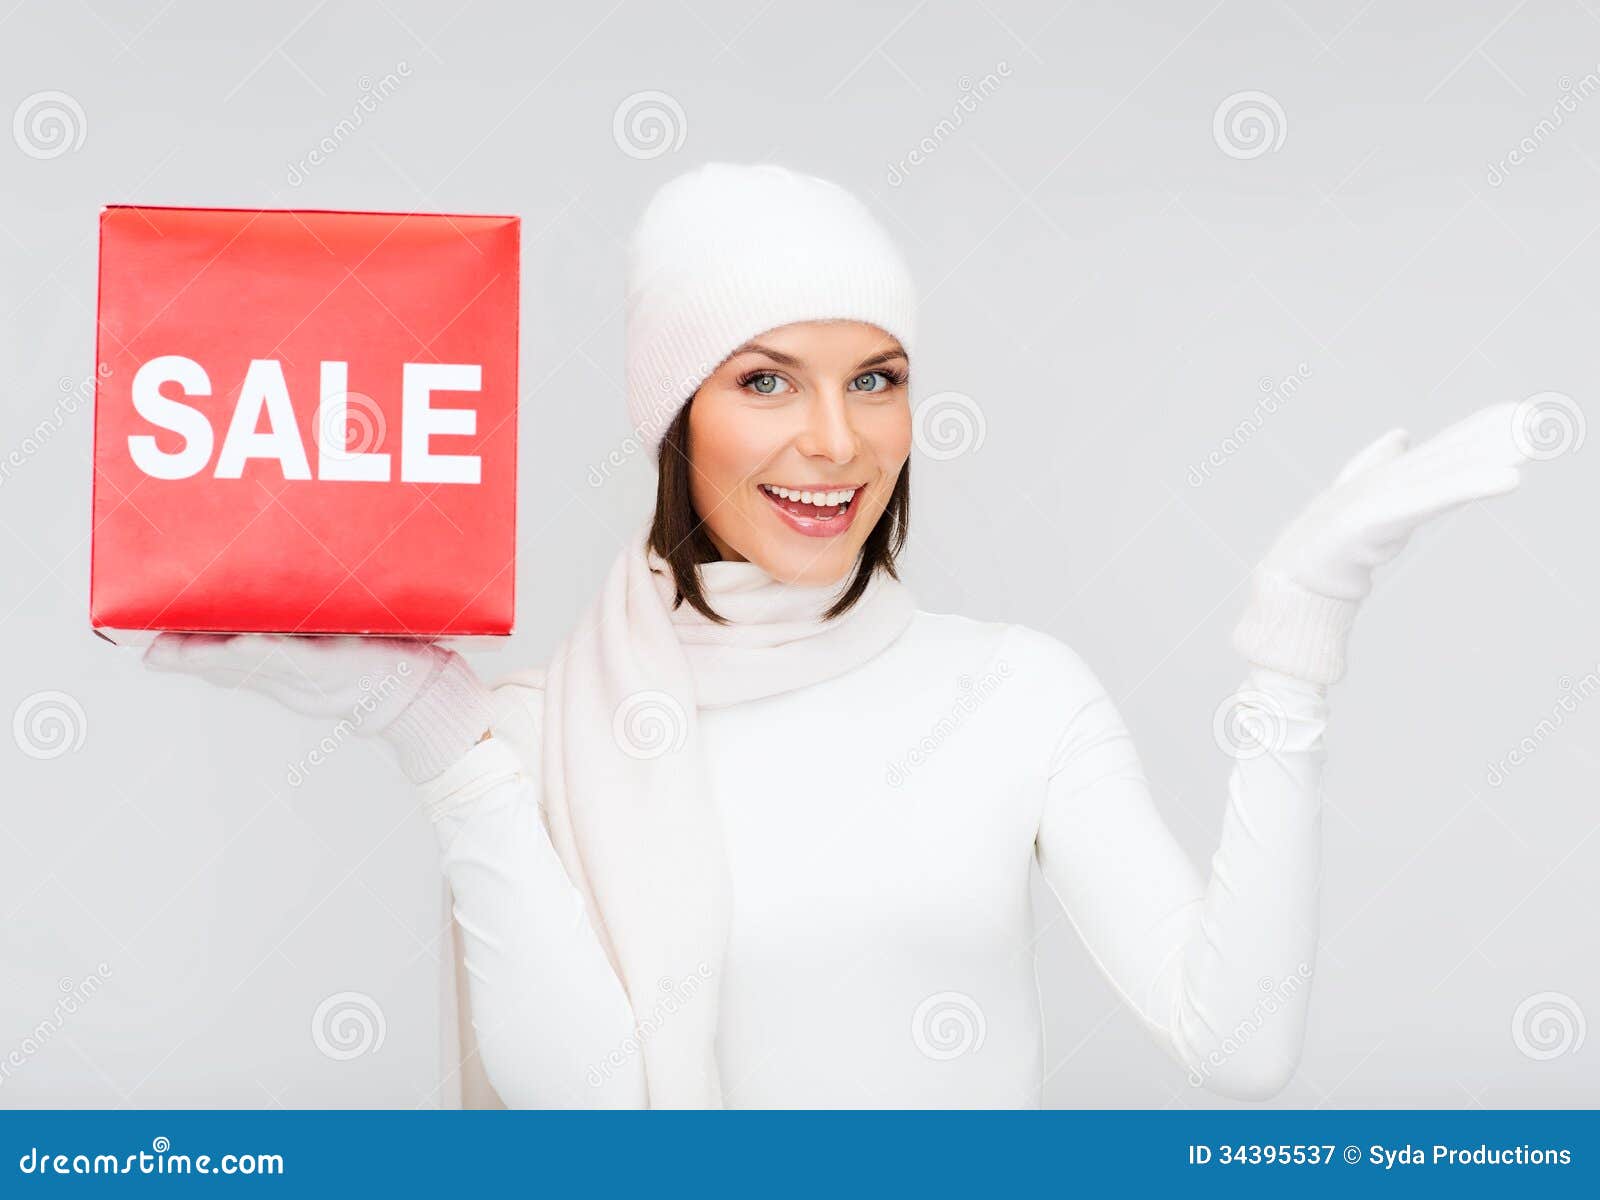 24,586 Winter Sale Clothes Stock Photos - Free & Royalty-Free Stock Photos  from Dreamstime